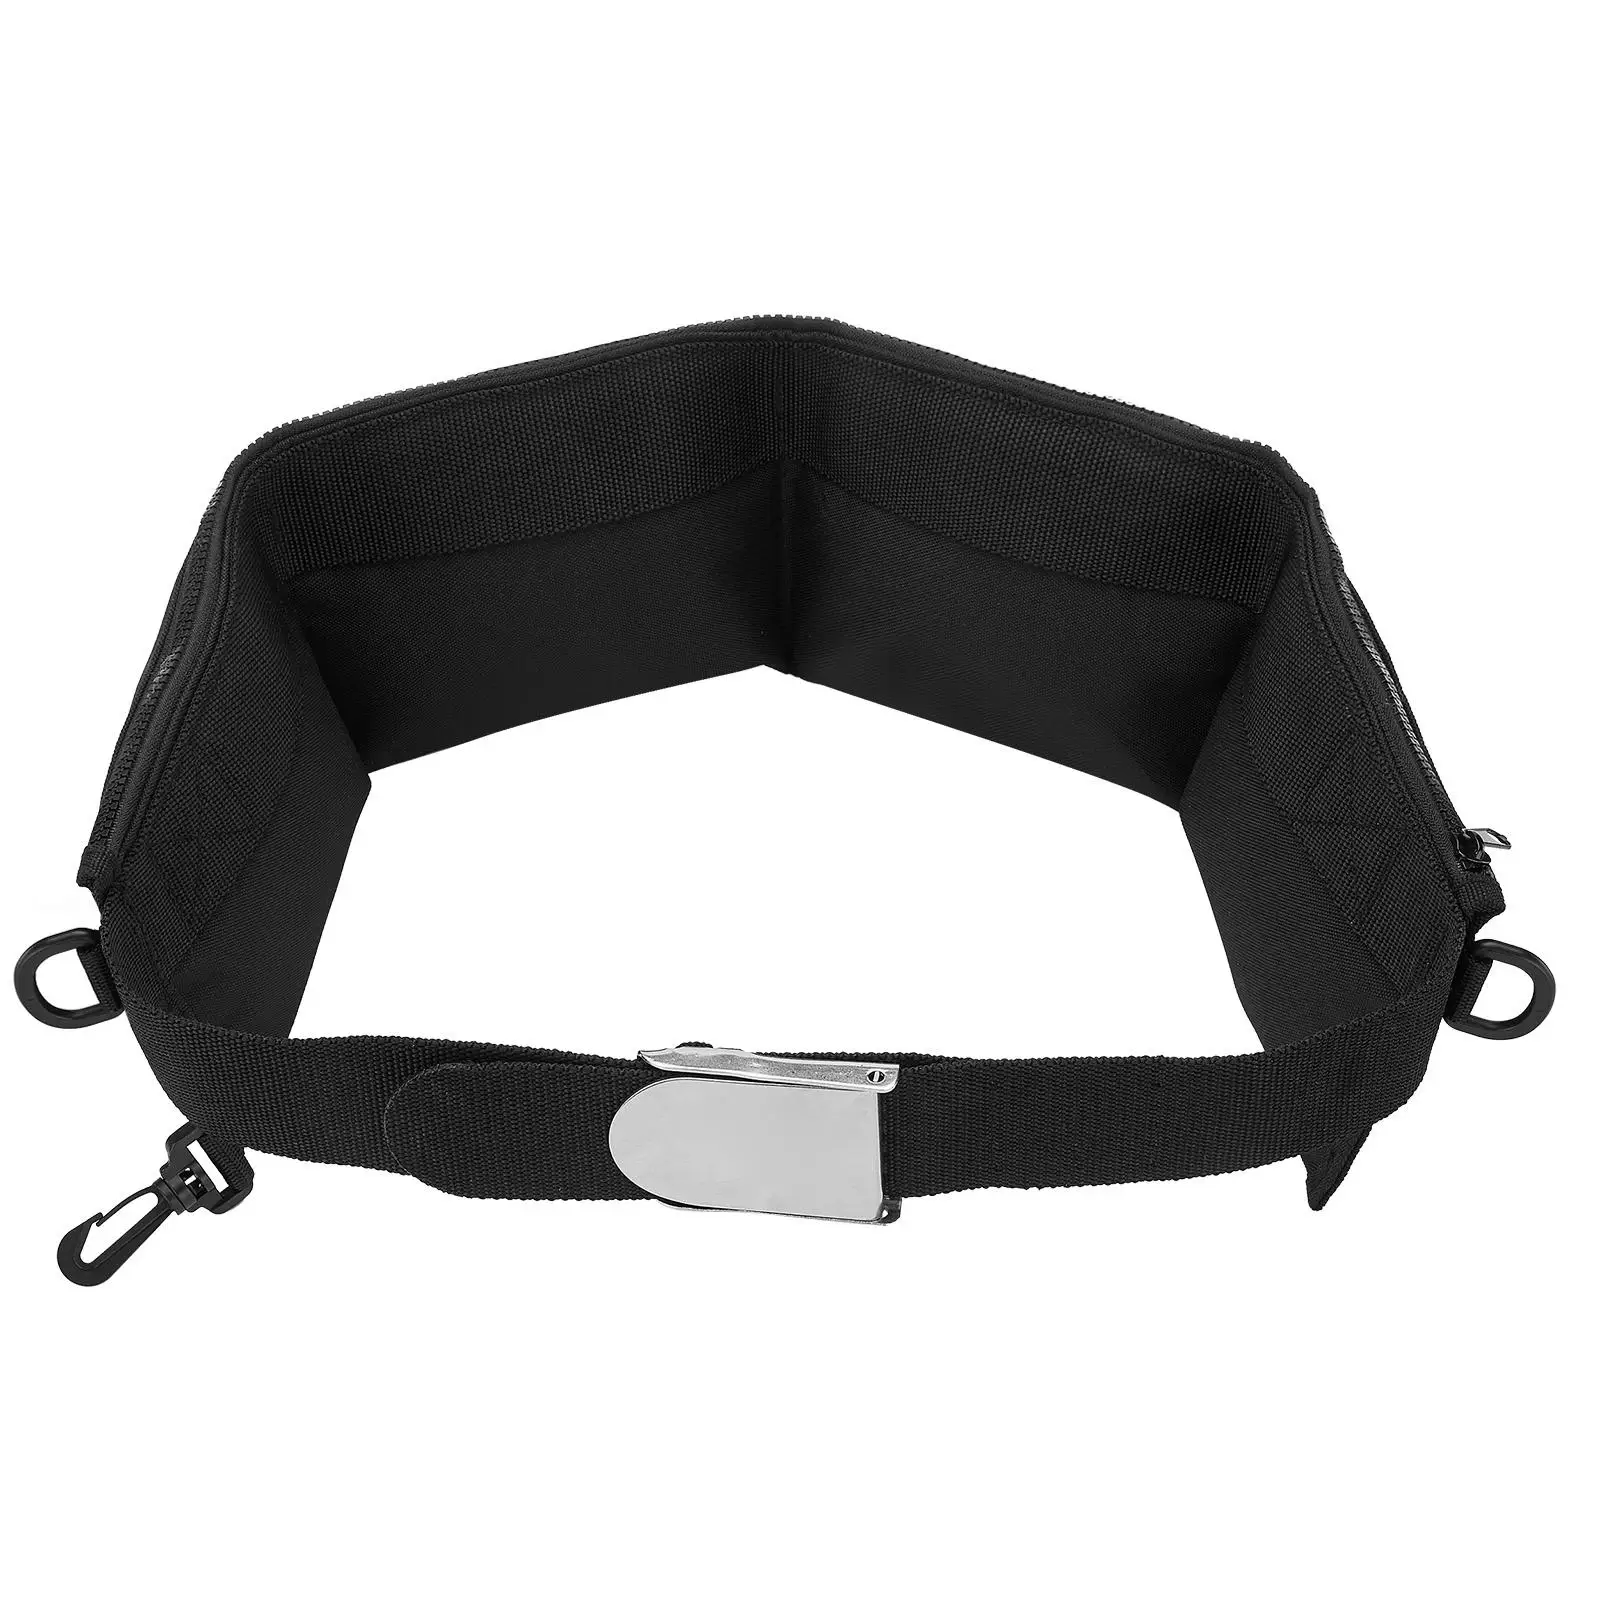 Scuba Weight Belt Diving Pocket Weight Belt for Free Diving Good Performance Comfortable Durable Accessories Adjustable Strap